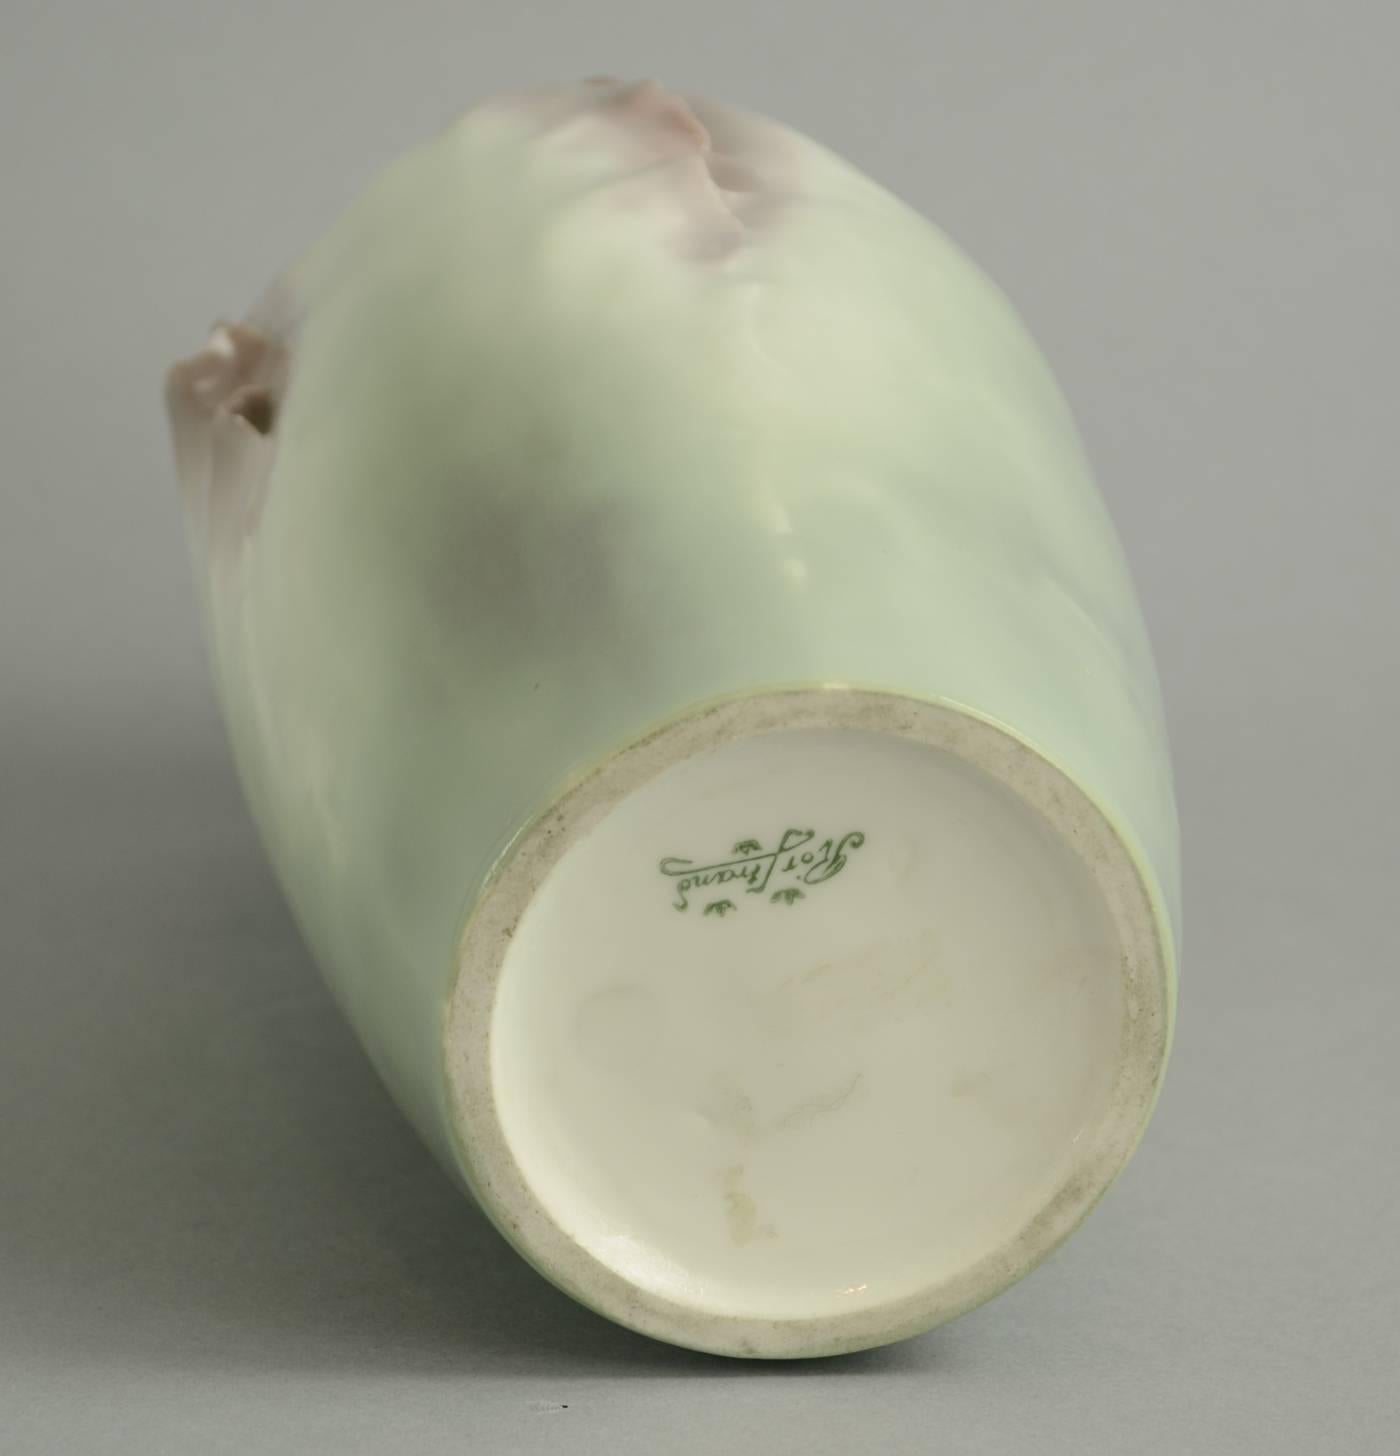 Swedish Art Nouveau Porcelain Vase in the Shape of Flower Bud by Rorstrand For Sale